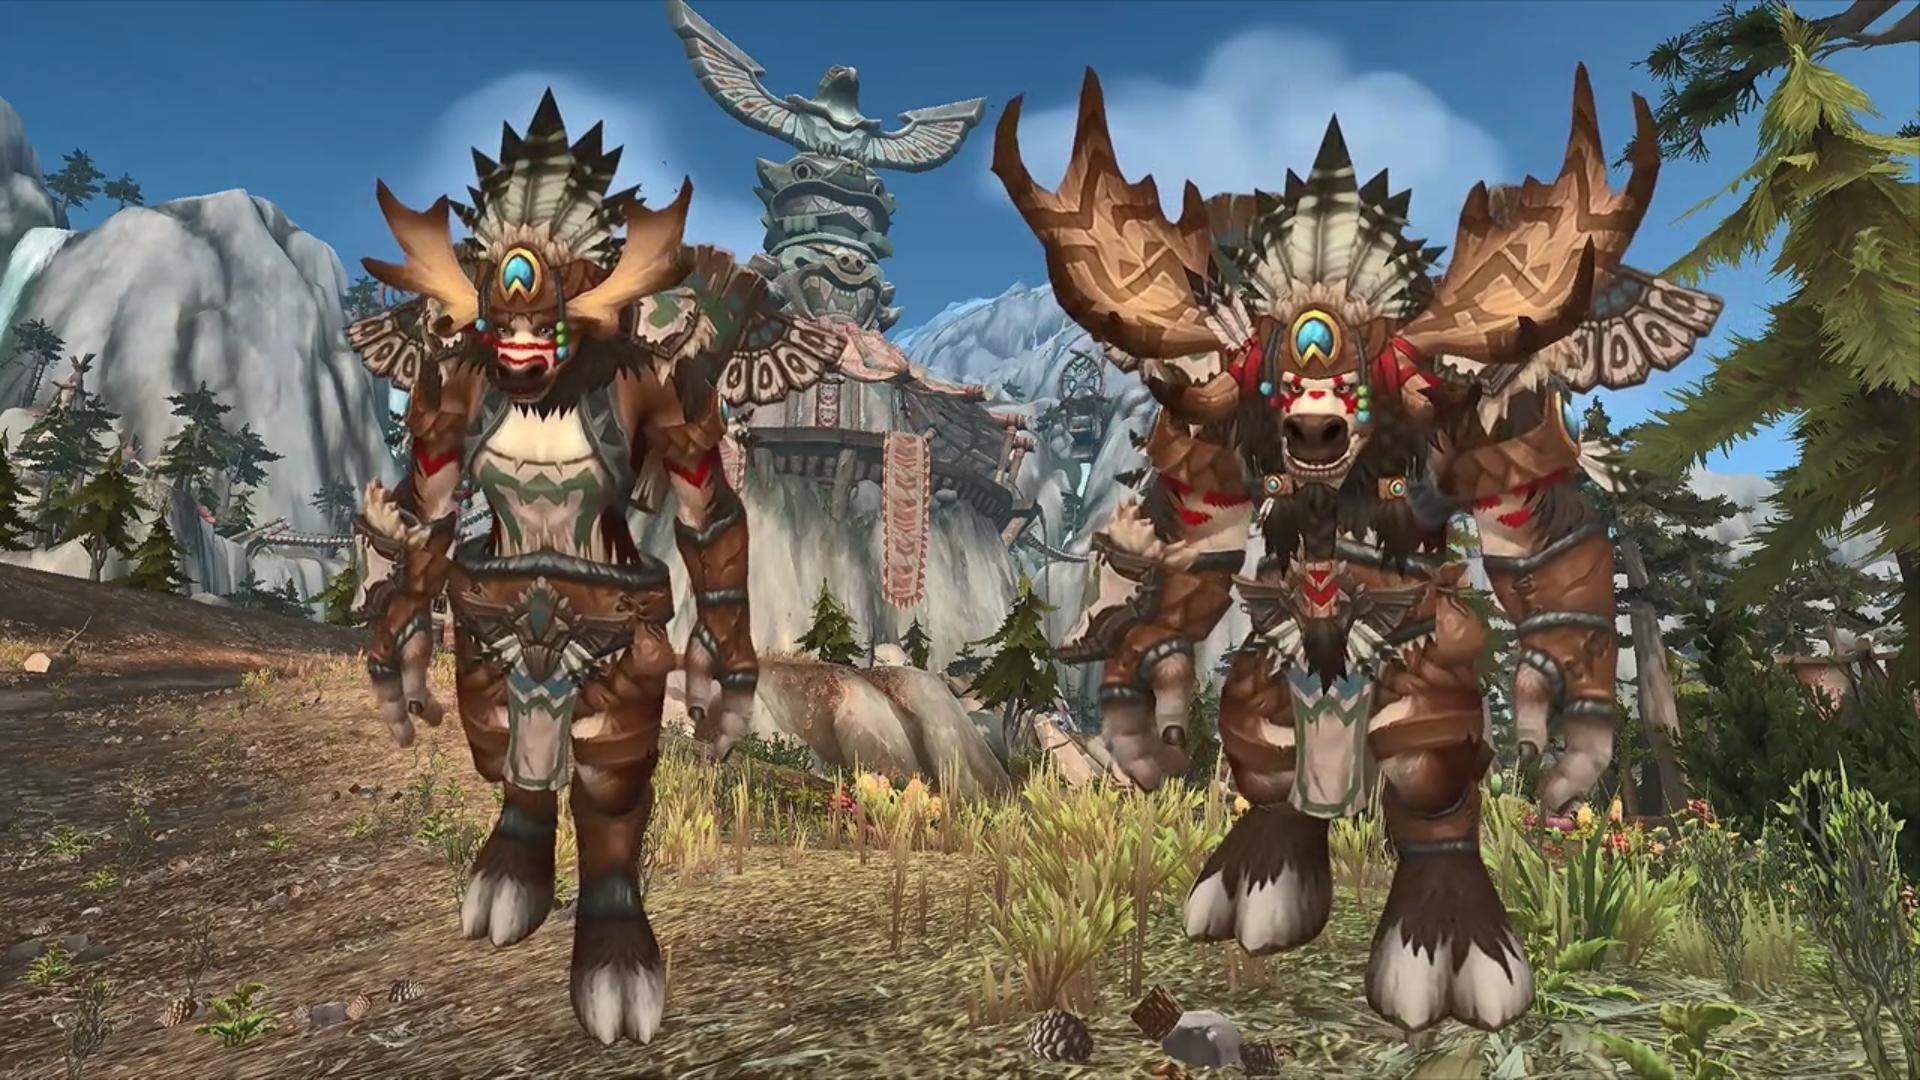 WoW Allied Races Level Up To 120 Boost Run Character LVL Heritage Armor Shared 